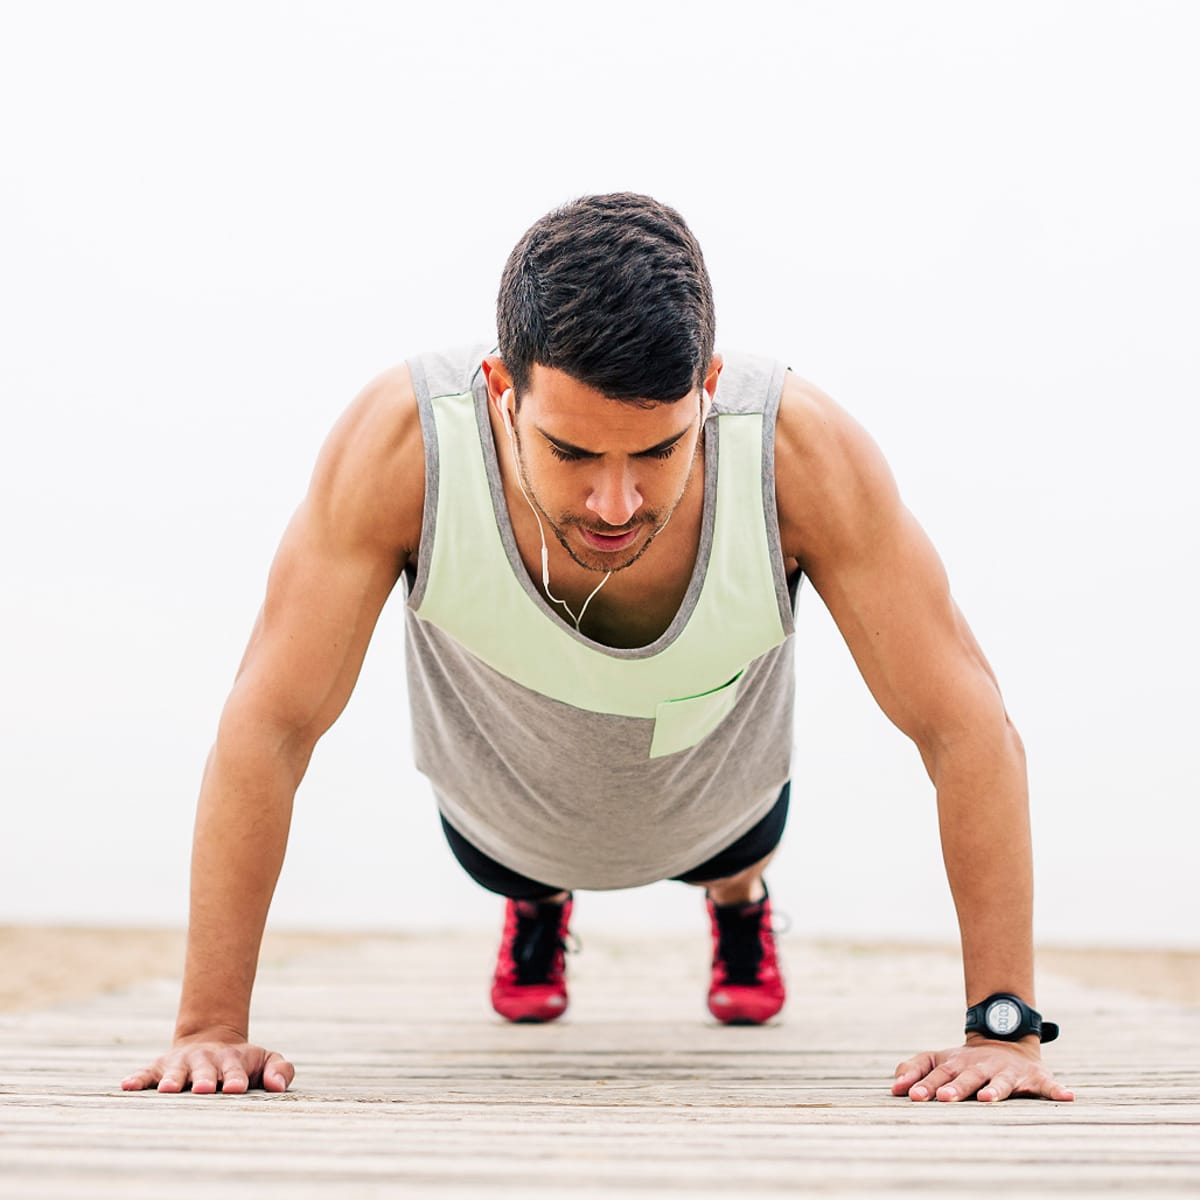 5 Ways to Make Your Pushups More Productive - Men's Journal